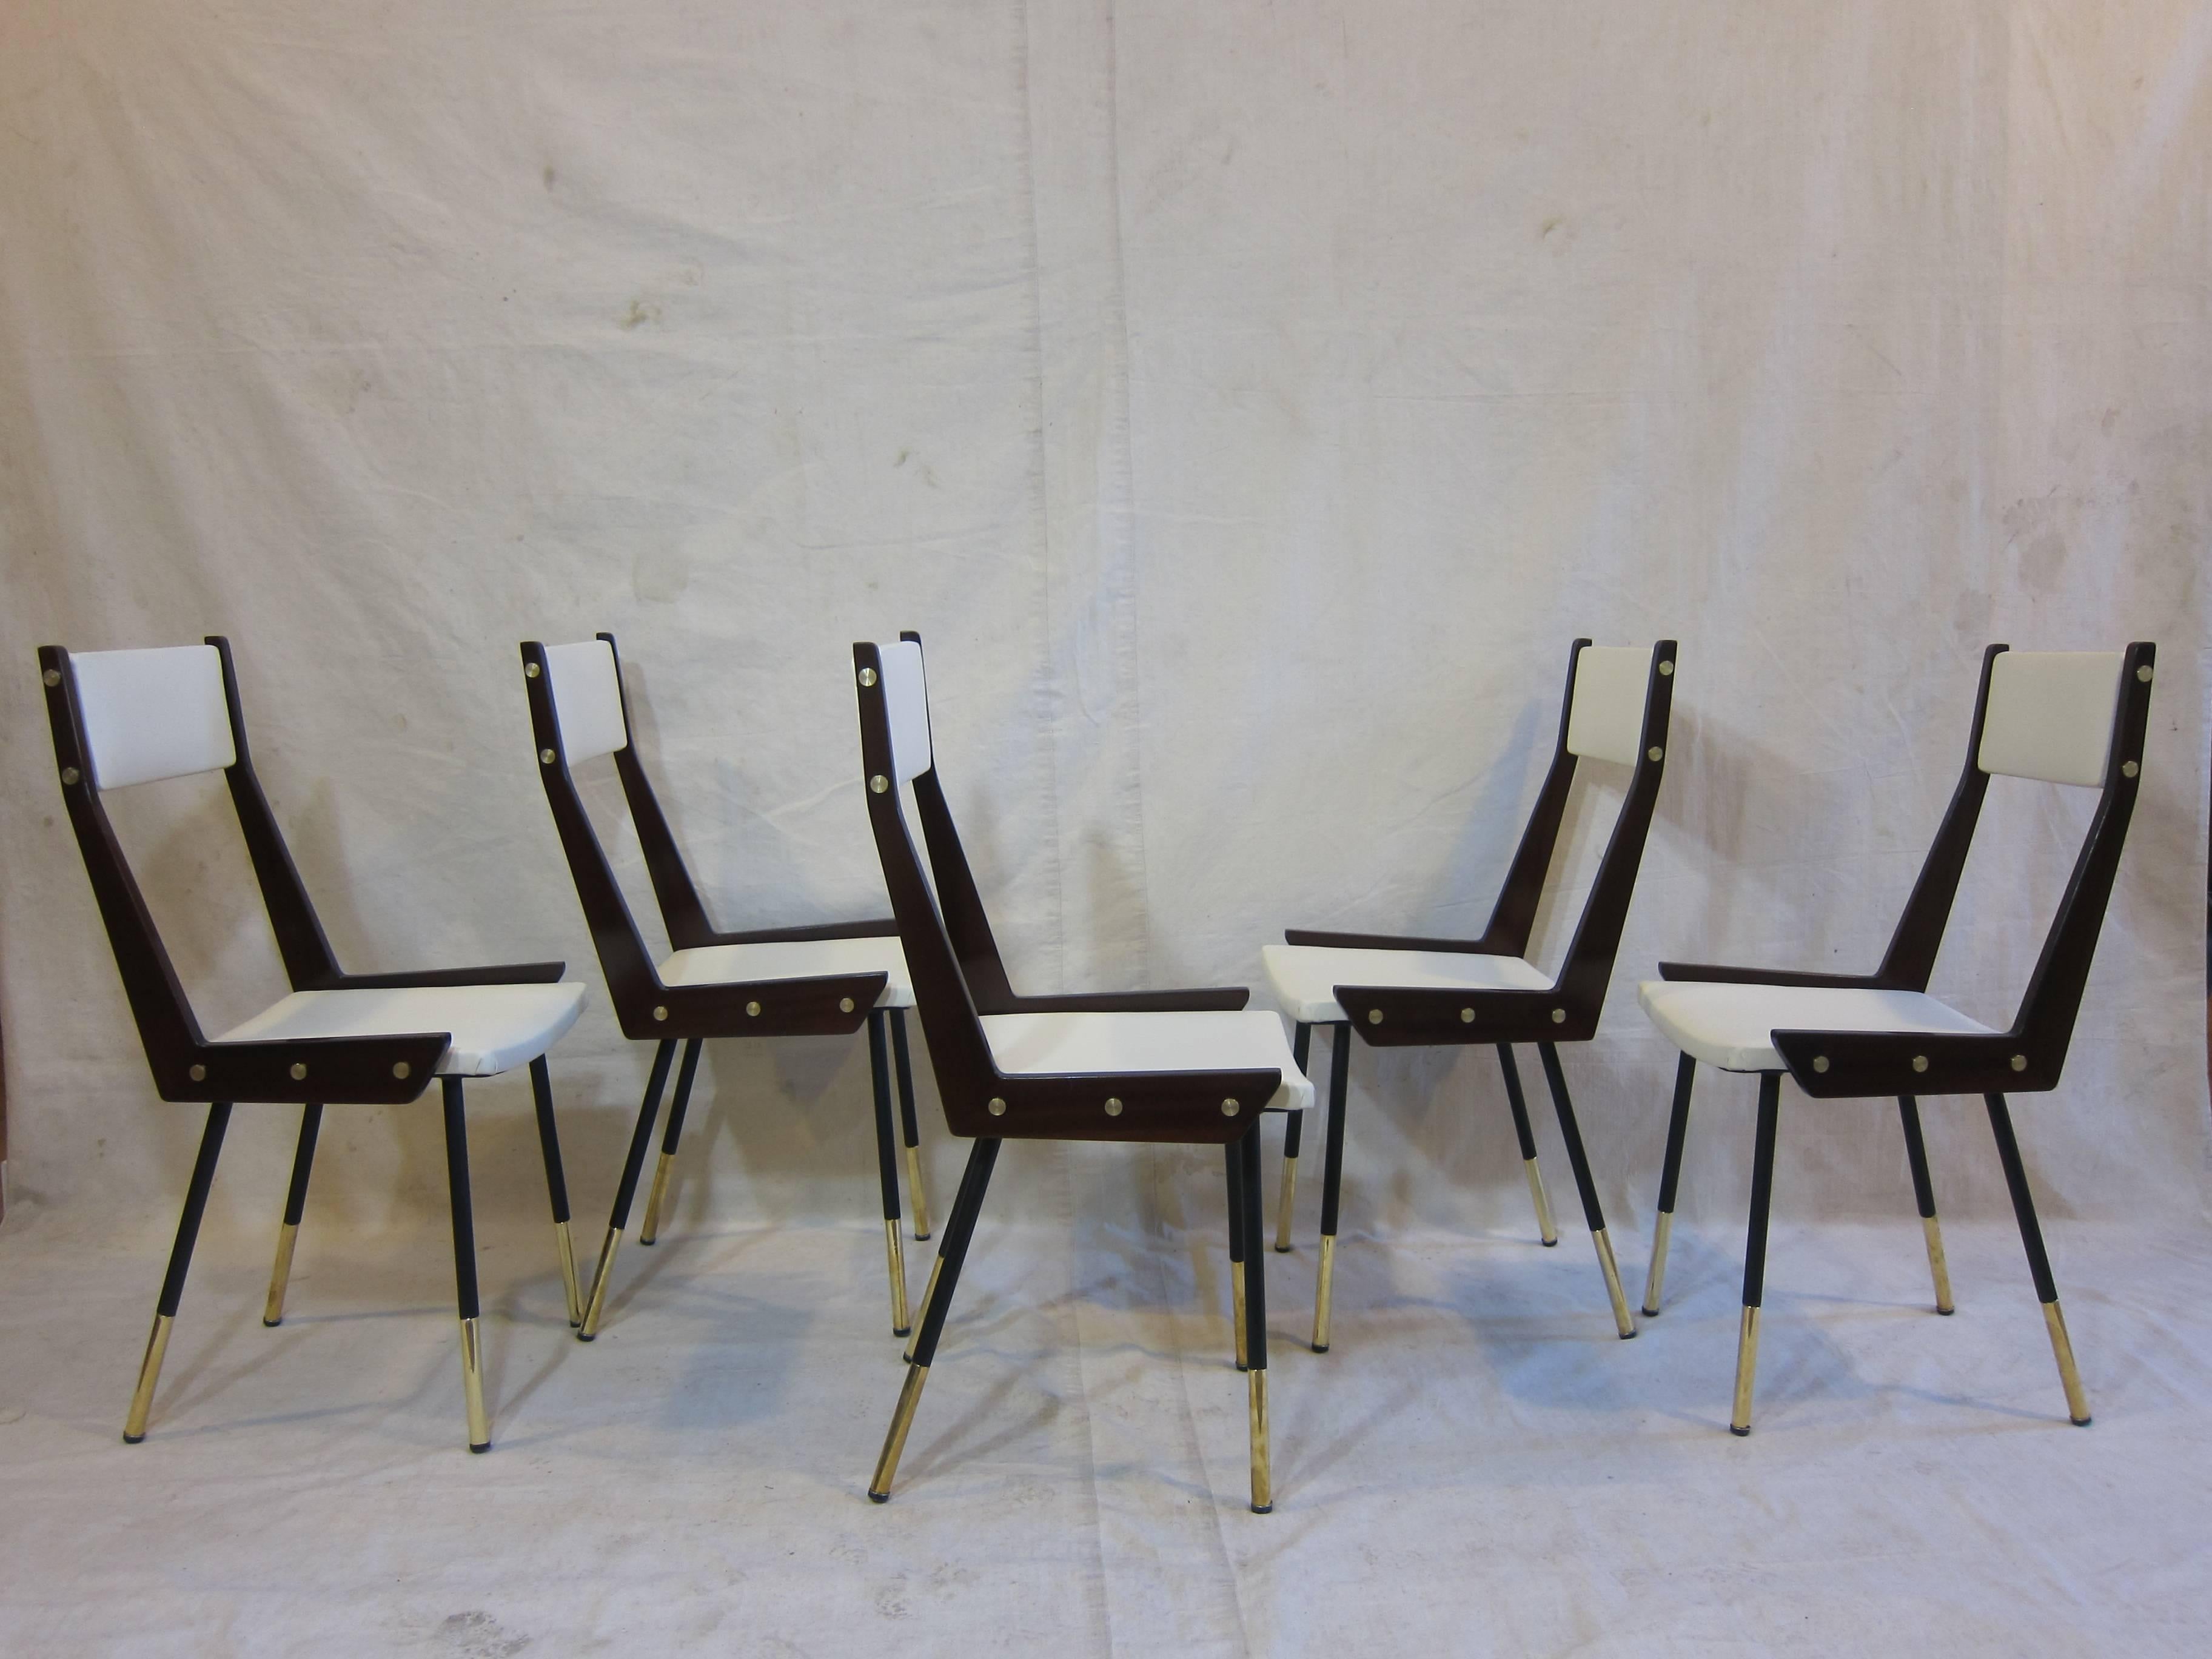 A rare set of Gianfranco Frattini chairs. Elegantly detailed with brass details, sabots, buttons, spacers and nail heads. Meticulously restored in excellent condition.  We have Five chairs, sale options set of 4,  and 1 that can be sold separately